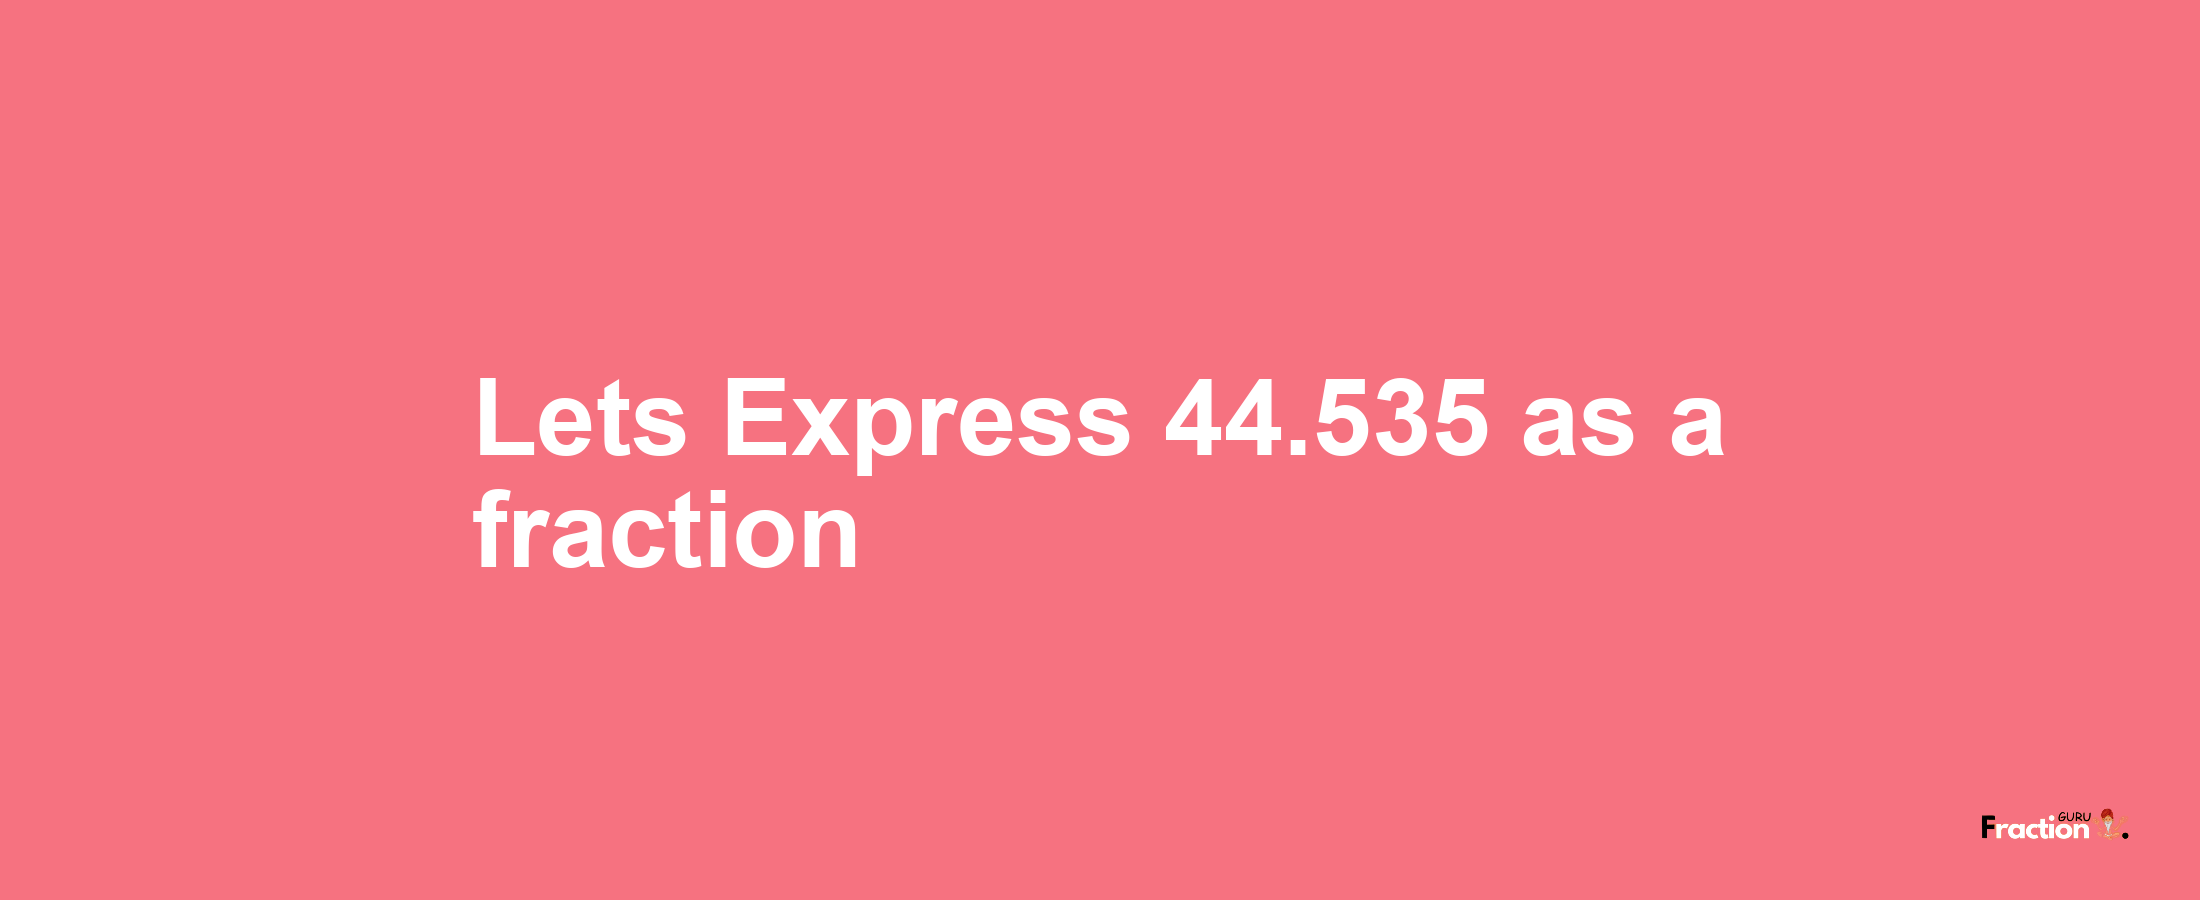 Lets Express 44.535 as afraction